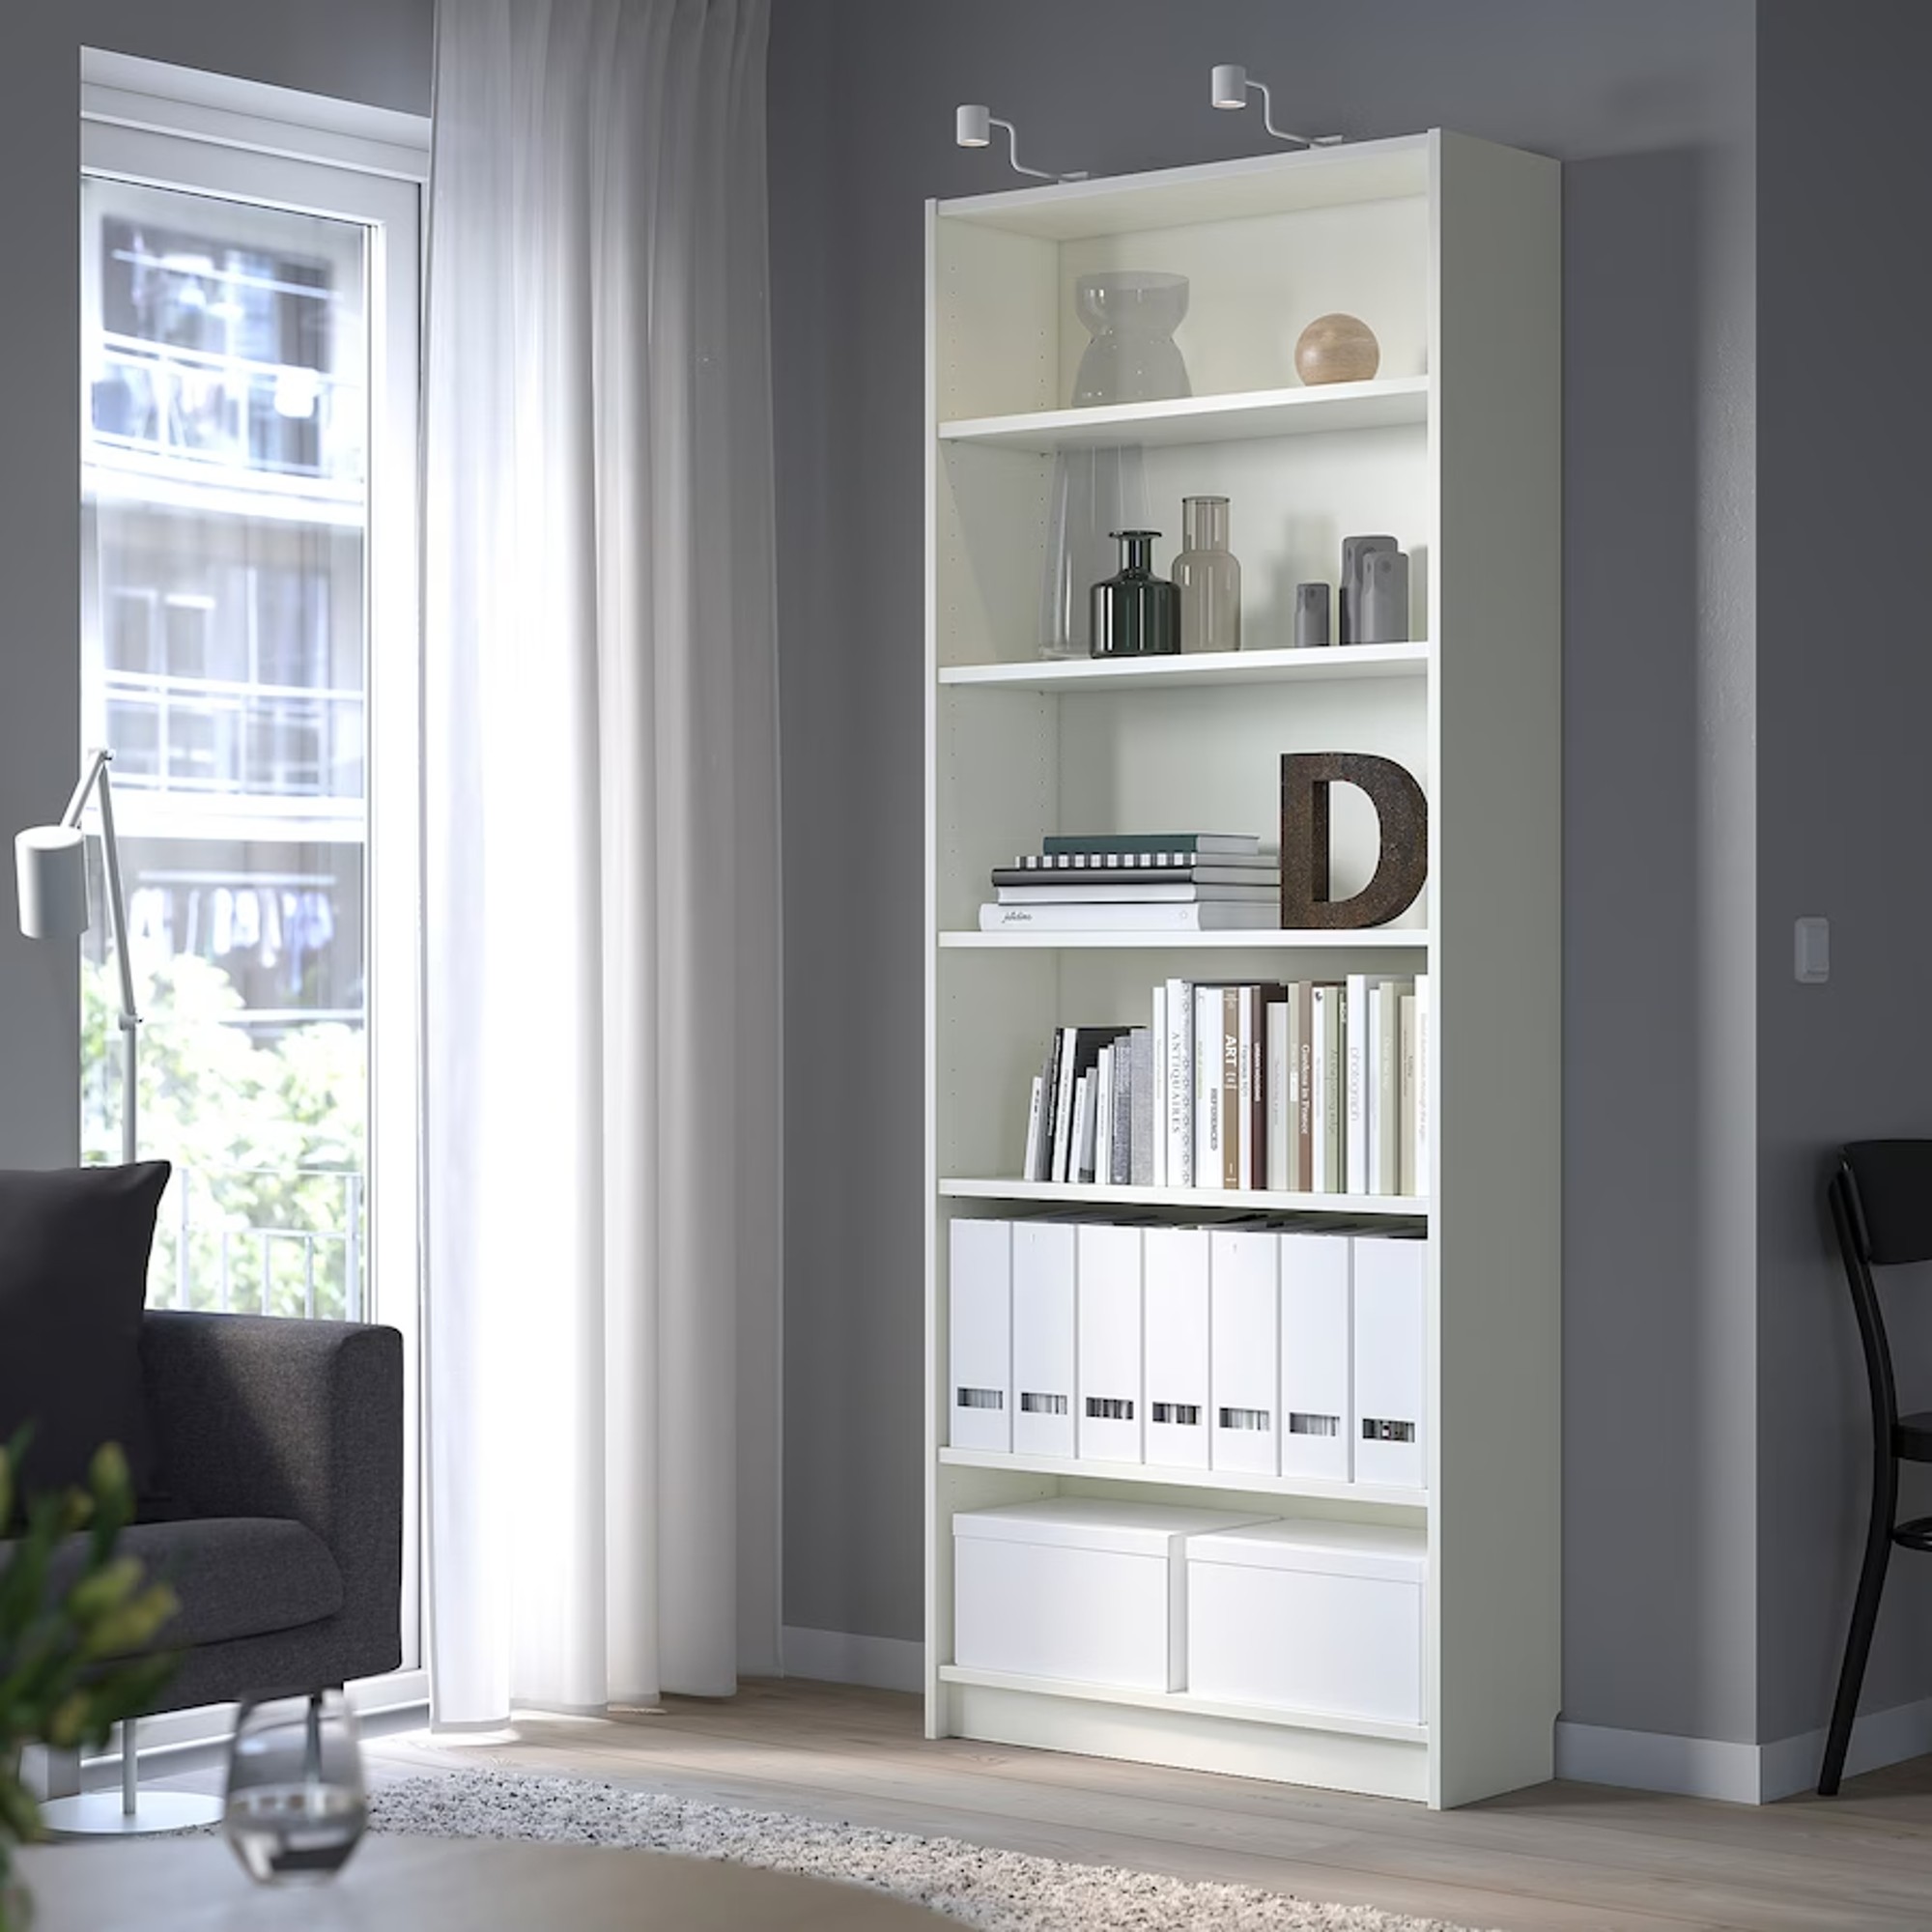 IKEA are making a big change to their bestselling BILLY bookcase